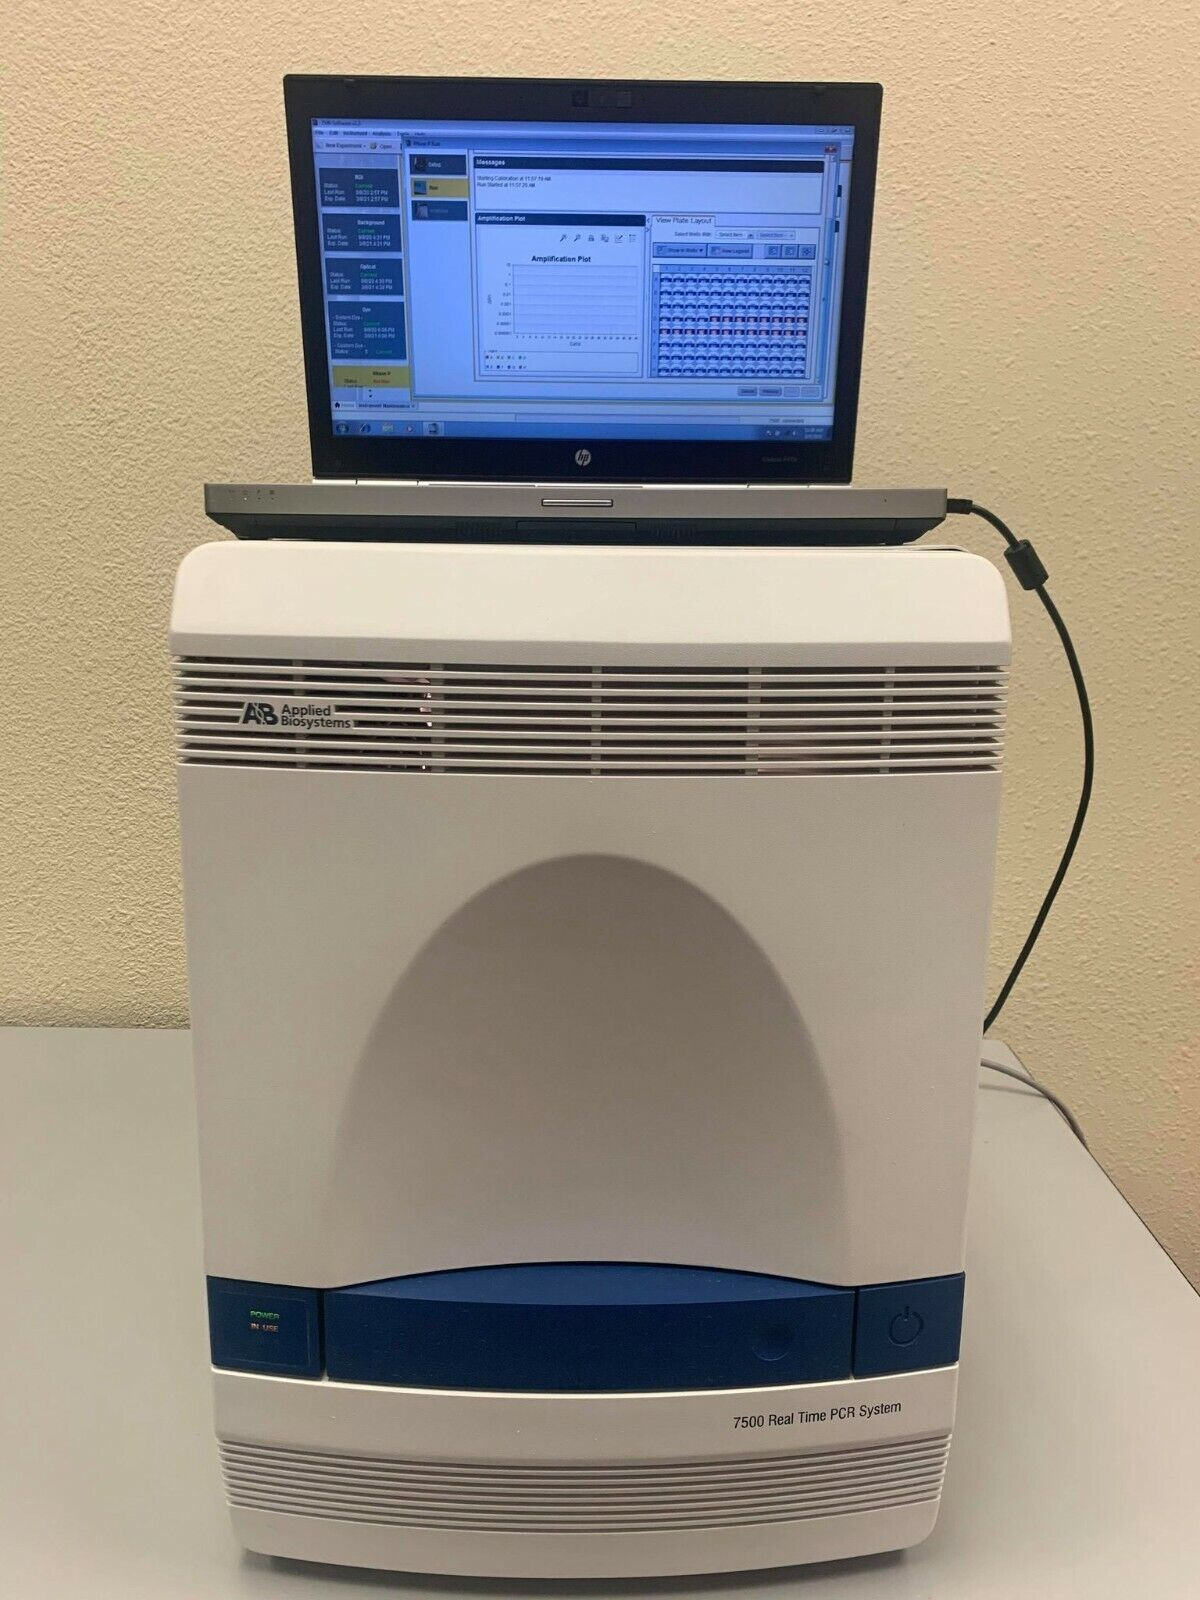 Applied Biosystems ABI 7500 Fast Dx real time PCR system, with computer - year 2021